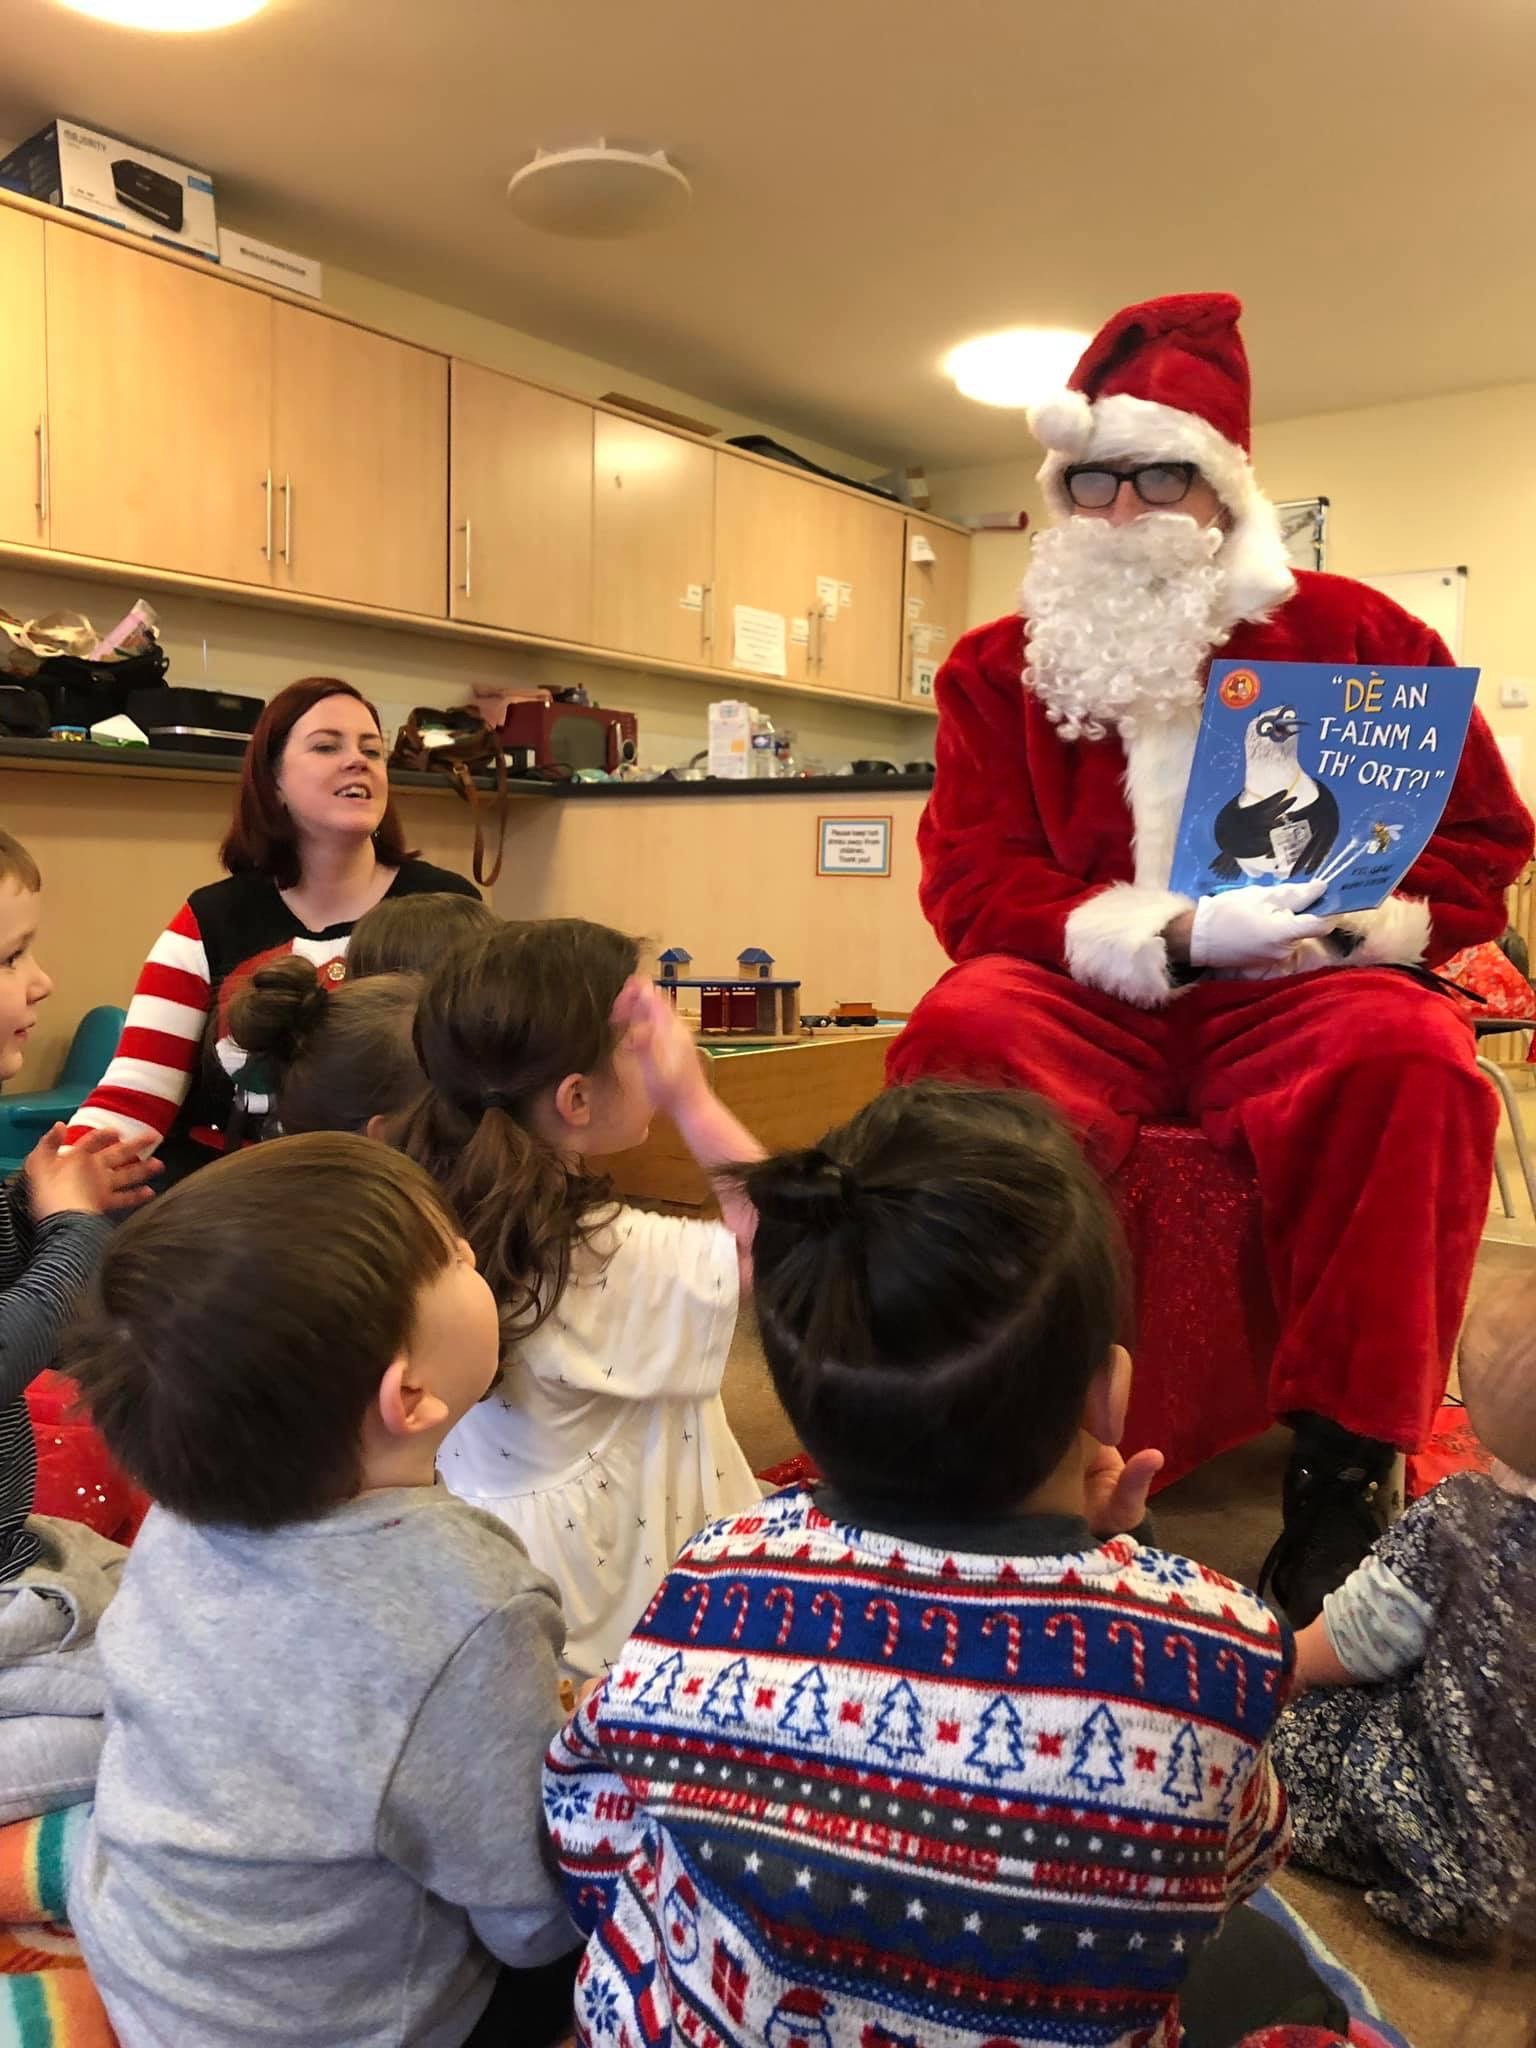 Picture: Santa claus reading "Dè an t-ainm a th'ort?" to children and staff member.